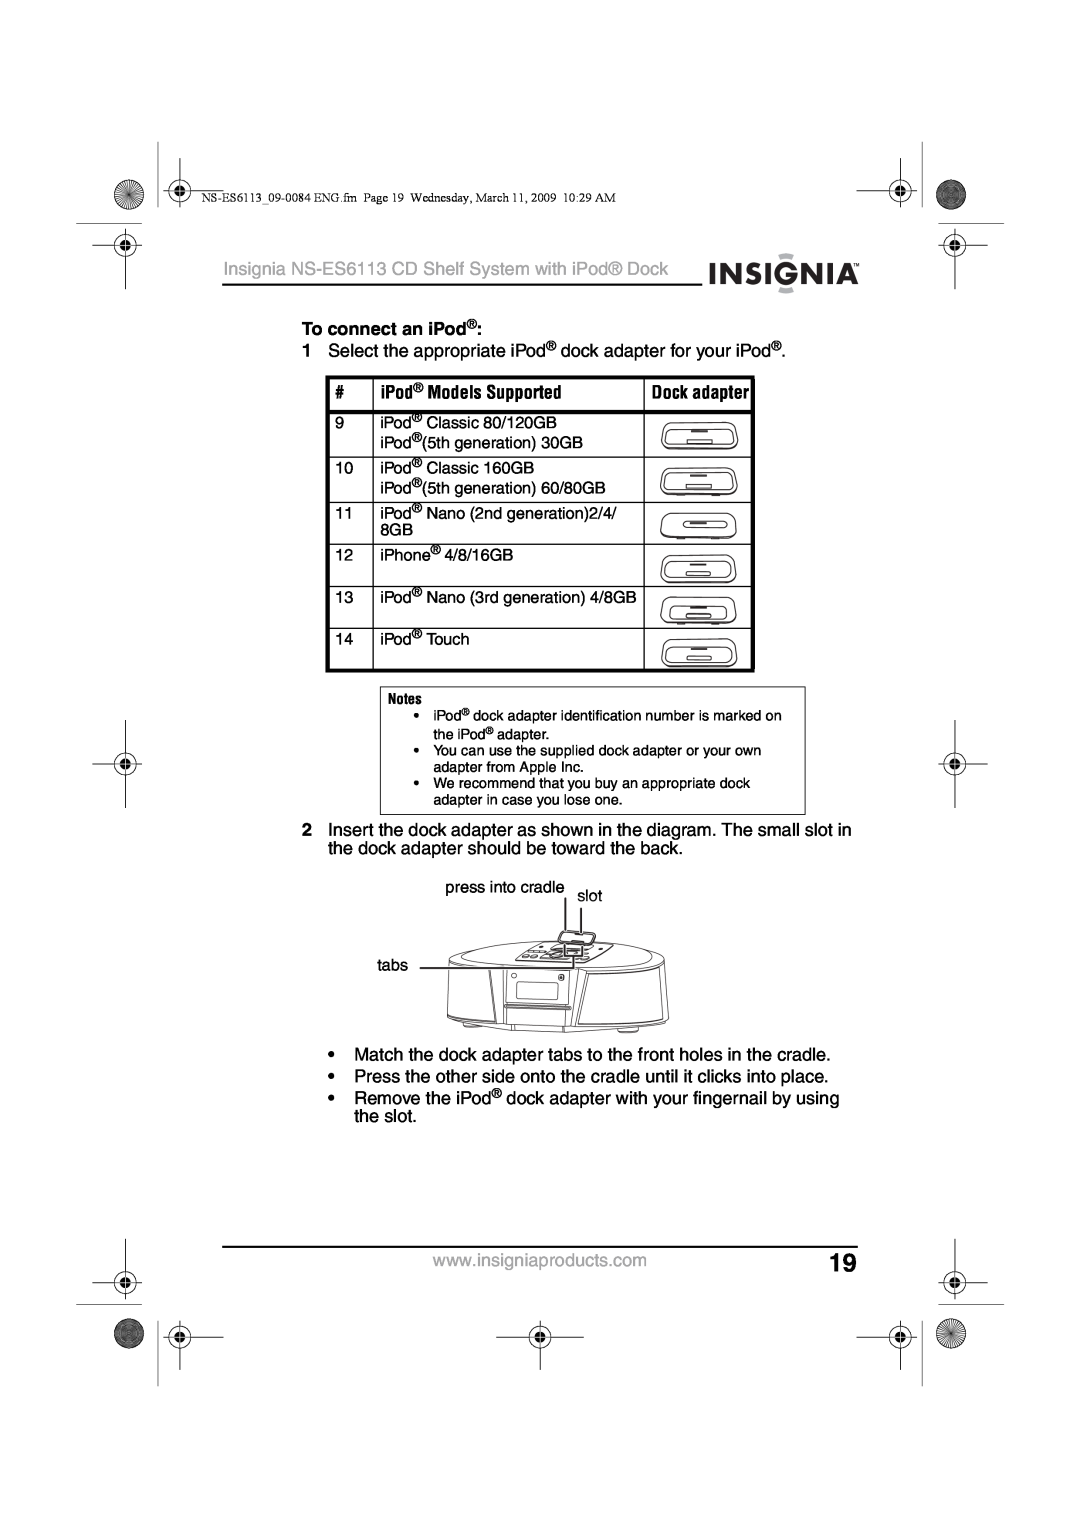 Insignia manual To connect an iPod, iPod Models Supported, Insignia NS-ES6113CD Shelf System with iPod Dock 